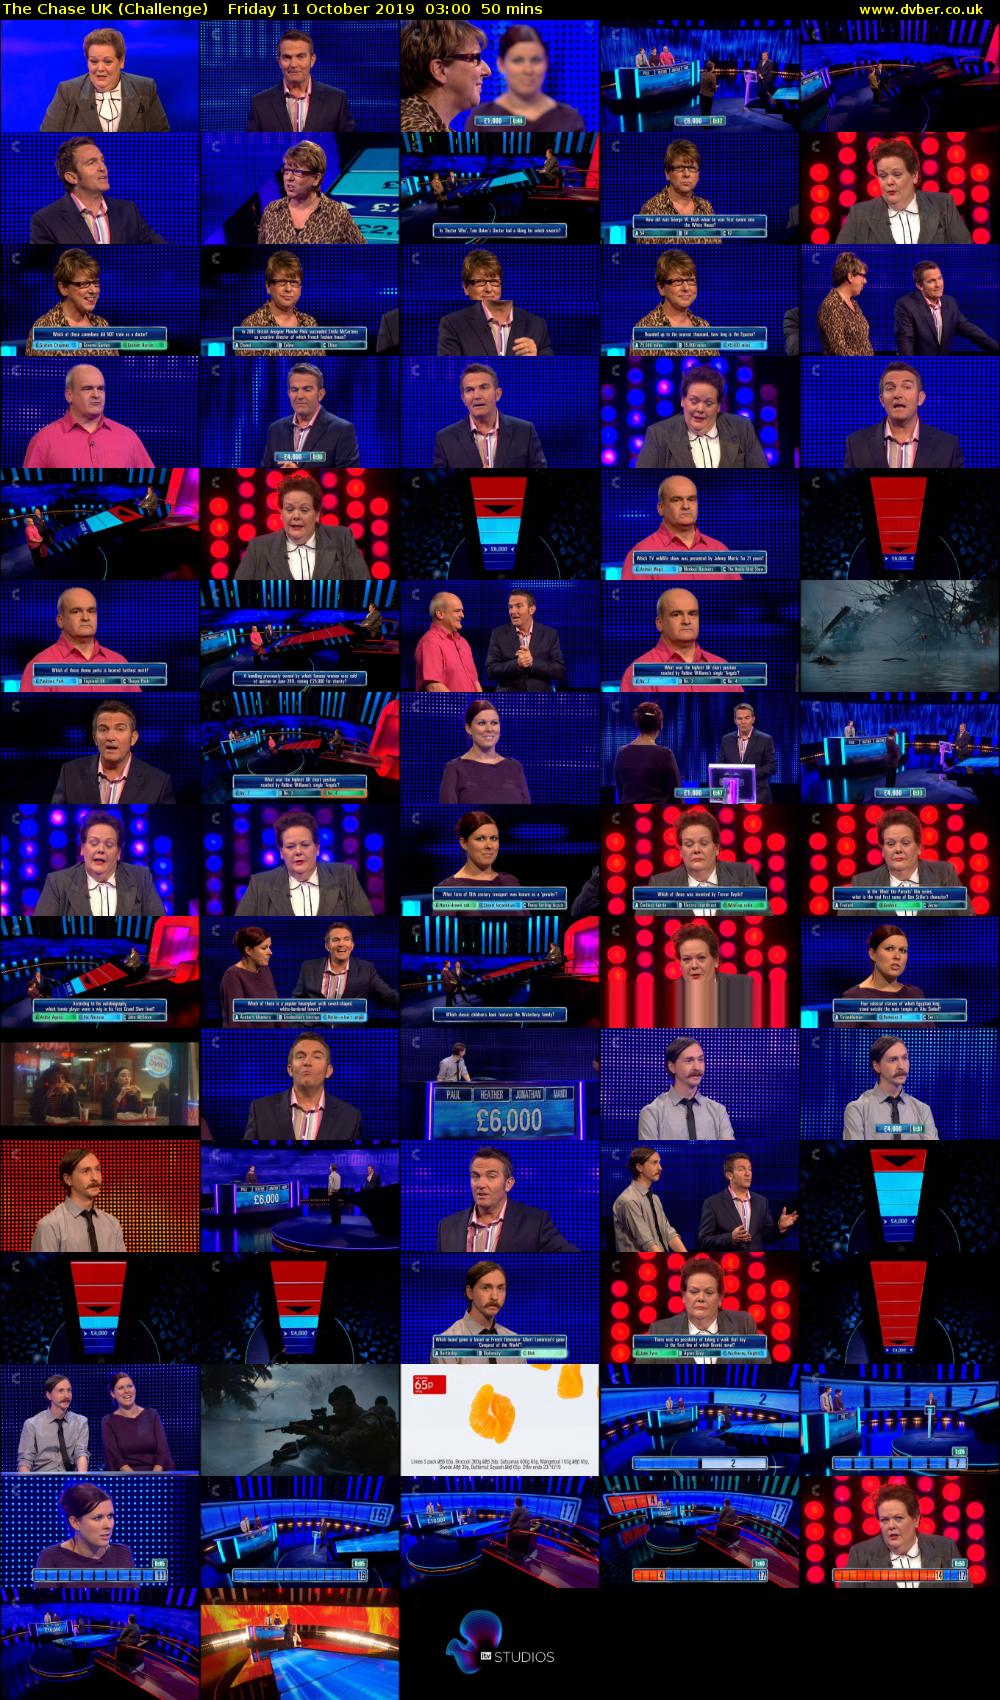 The Chase UK (Challenge) Friday 11 October 2019 03:00 - 03:50